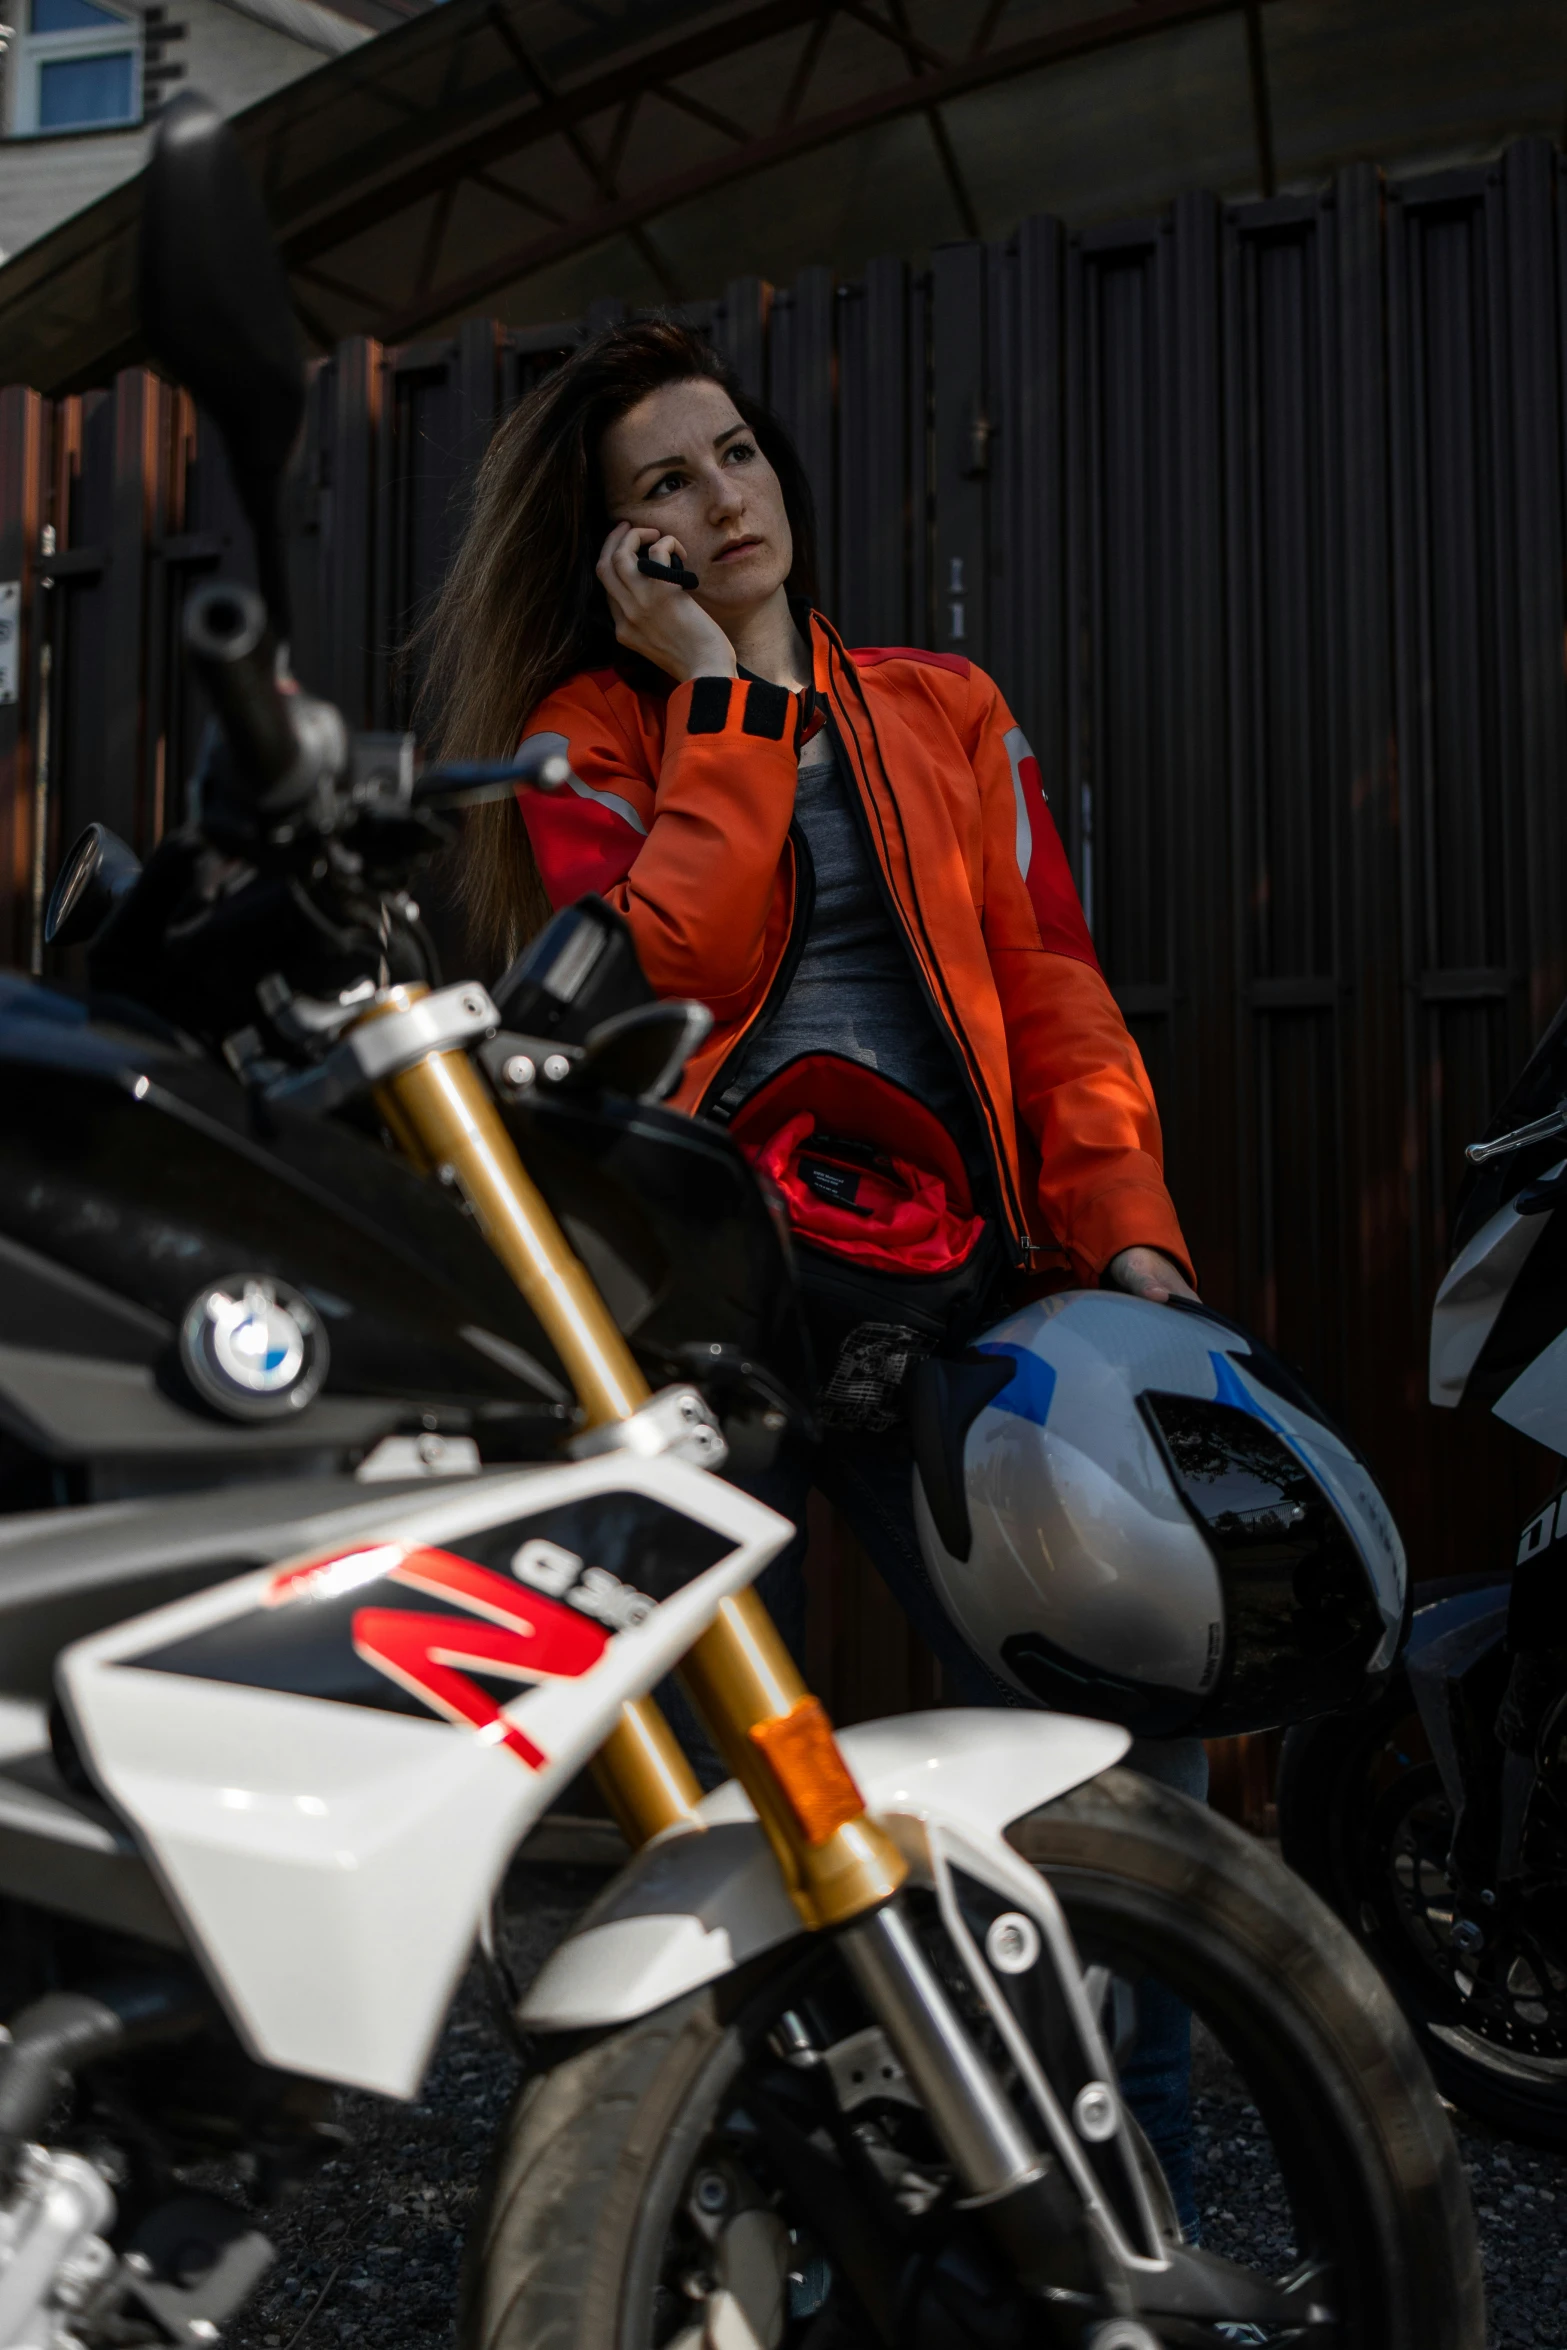 a woman sitting on a motorcycle talking on her cell phone